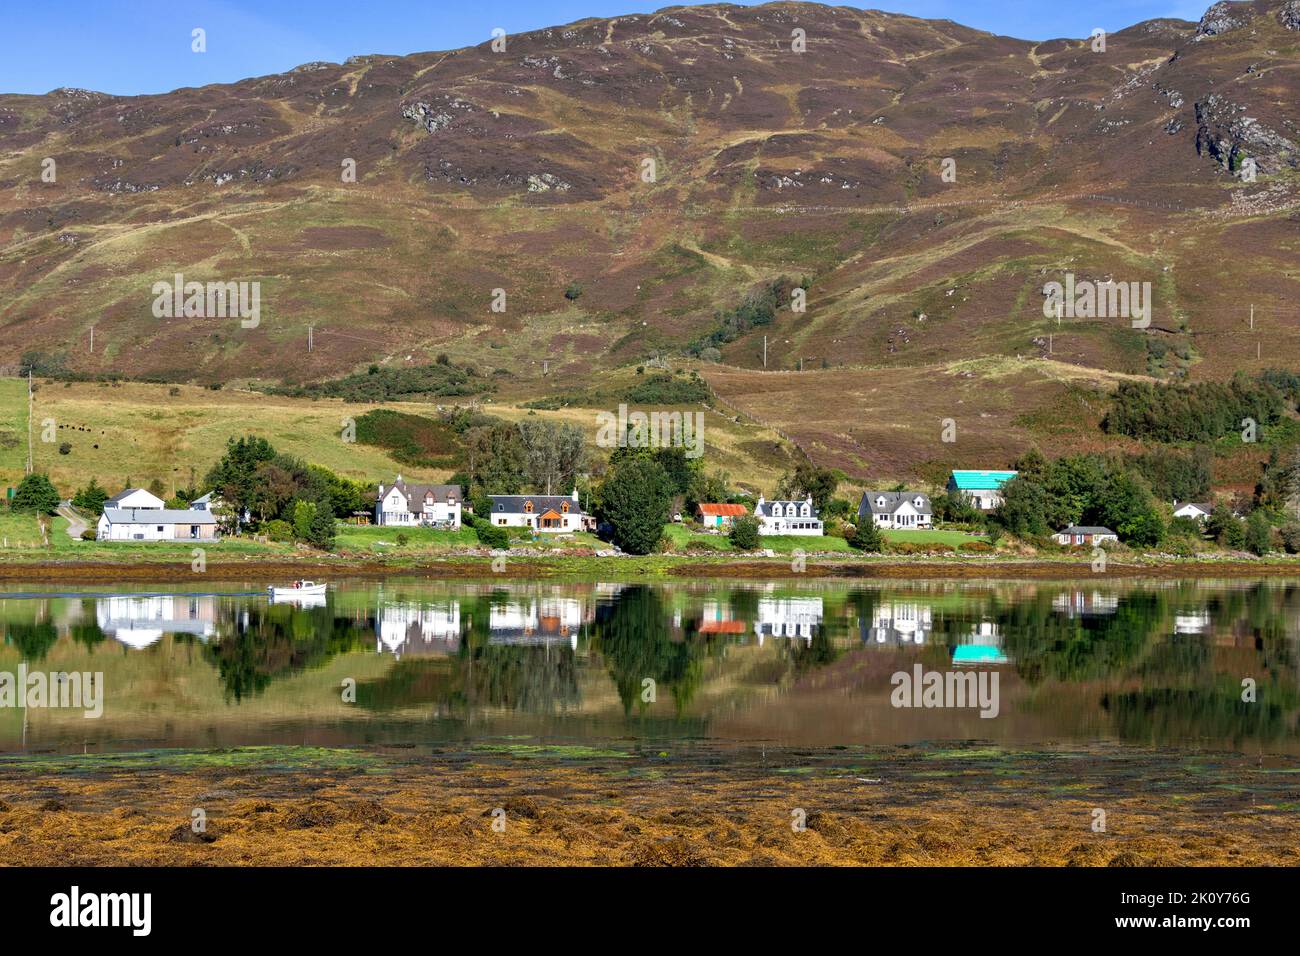 DORNIE KINTAIL SCOTLAND LATE SUMMER LOOKING ACROSS LOCH LONG TO HOUSES AND A PASSING SMALL FISHING BOAT Stock Photo